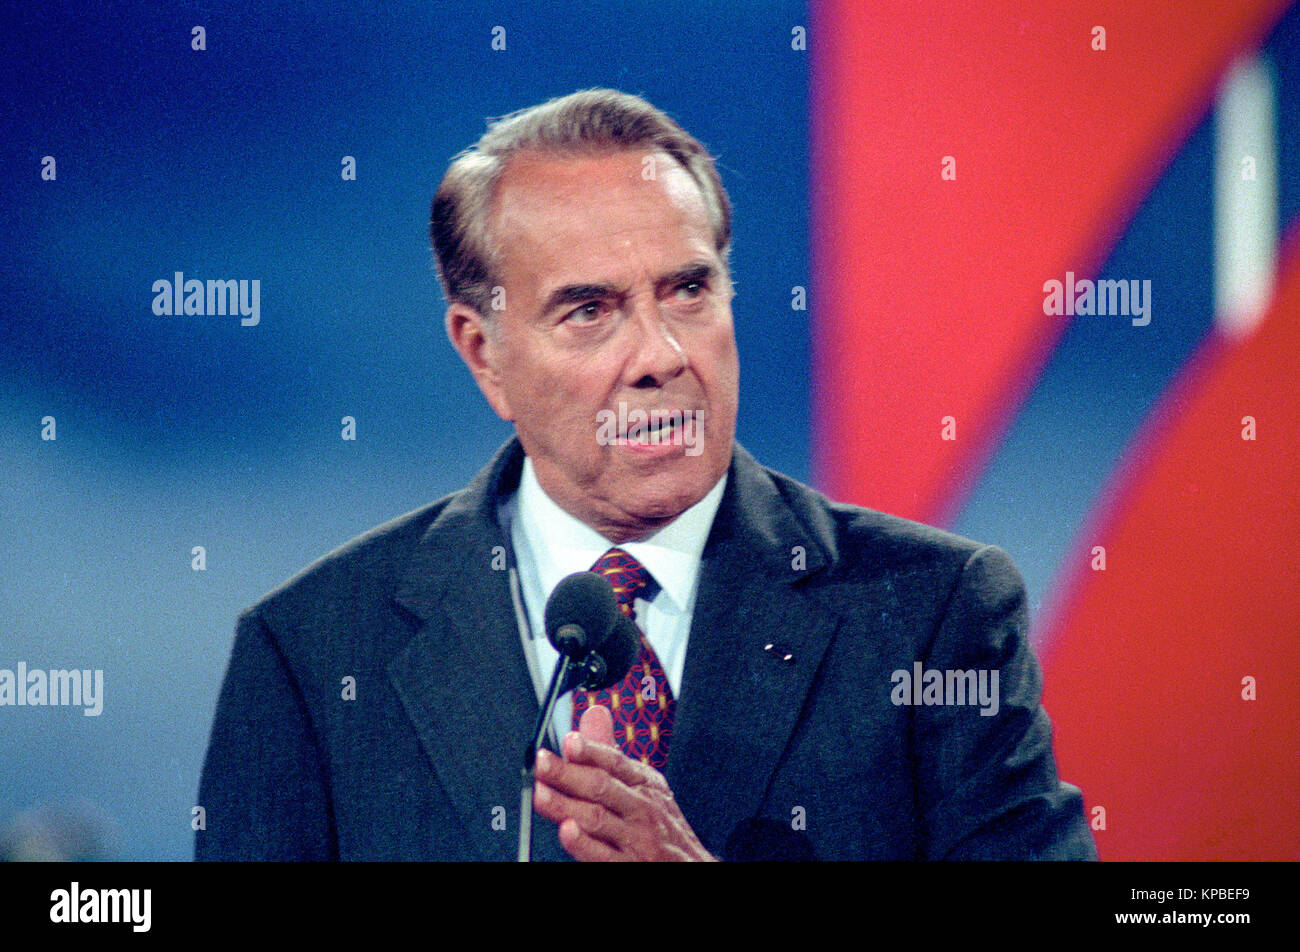 Former United States Senator Bob Dole (Republican of Kansas) delivers his speech accepting the nomination of the Republican Party to be its candidate for President of the United States at the San Diego Convention Center in San Diego, California on Thursday, August 15, 1996. Credit: Ron Sachs / CNP /MediaPunch Stock Photo